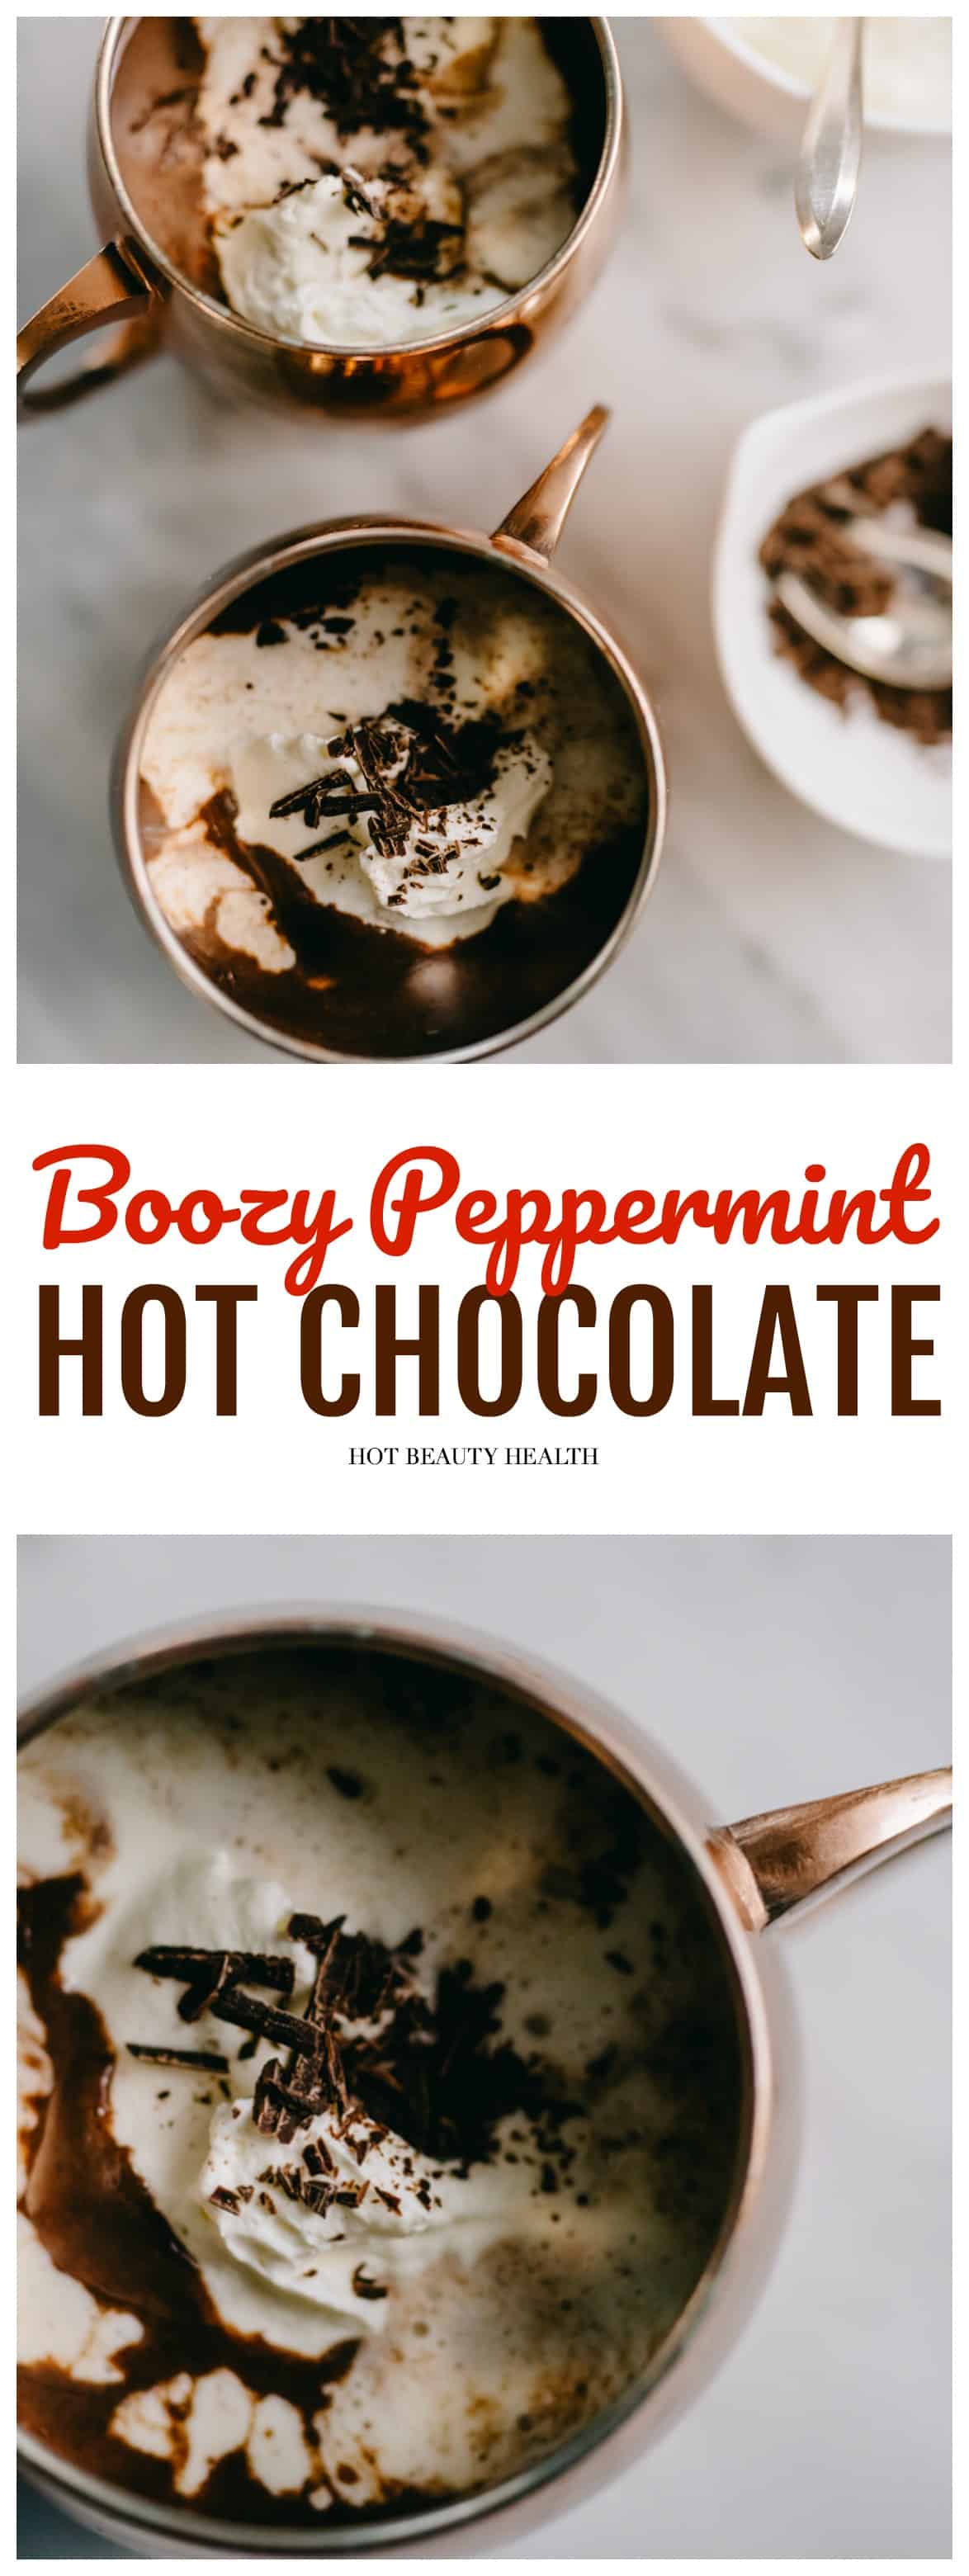 Looking for holiday drink ideas that are alcoholic and will warm you and your guests up from the inside out? This bourbon peppermint hot chocolate recipe is so simple and delicious and makes the perfect post-dinner cocktail for Thanksgiving and Christmas. Click pin to make this easy homemade holiday drink!